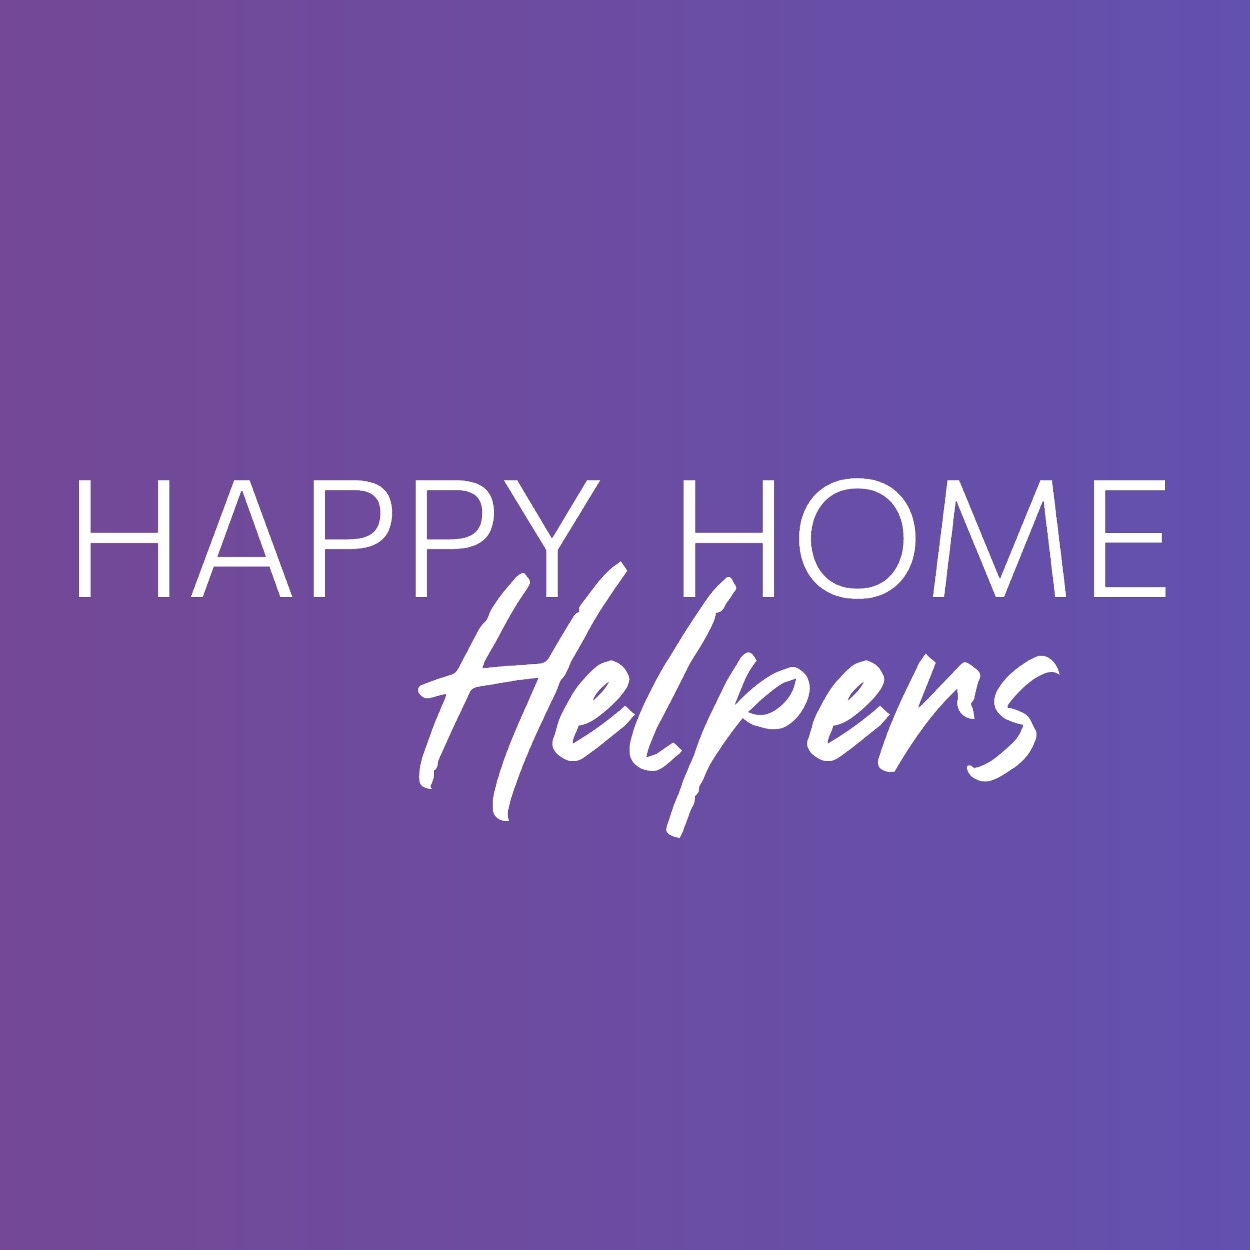 Business logo of Happy Home Helpers